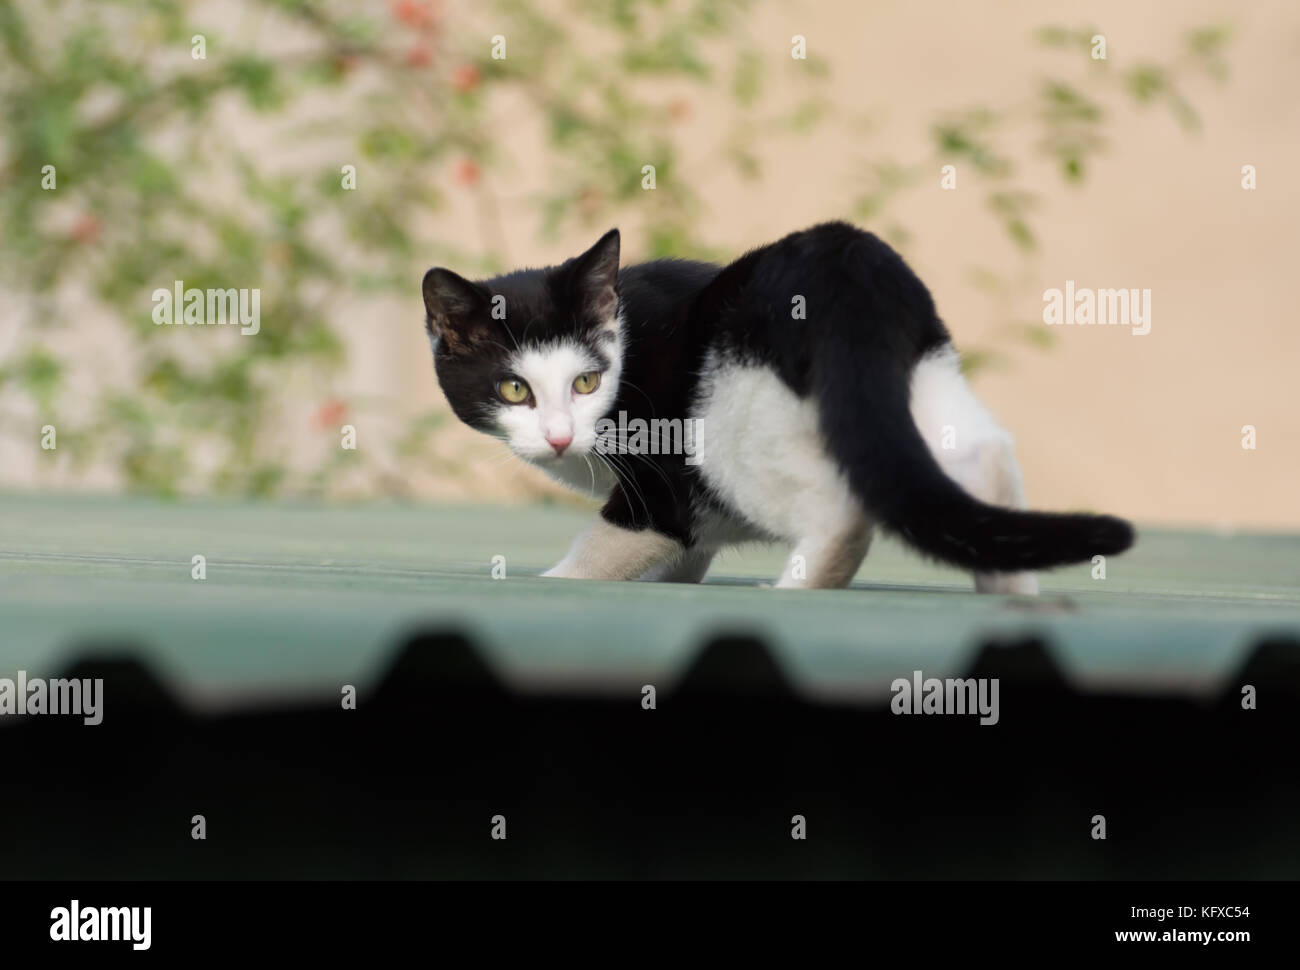 Black and white cat up on a garage roof, startled by some sound Stock Photo